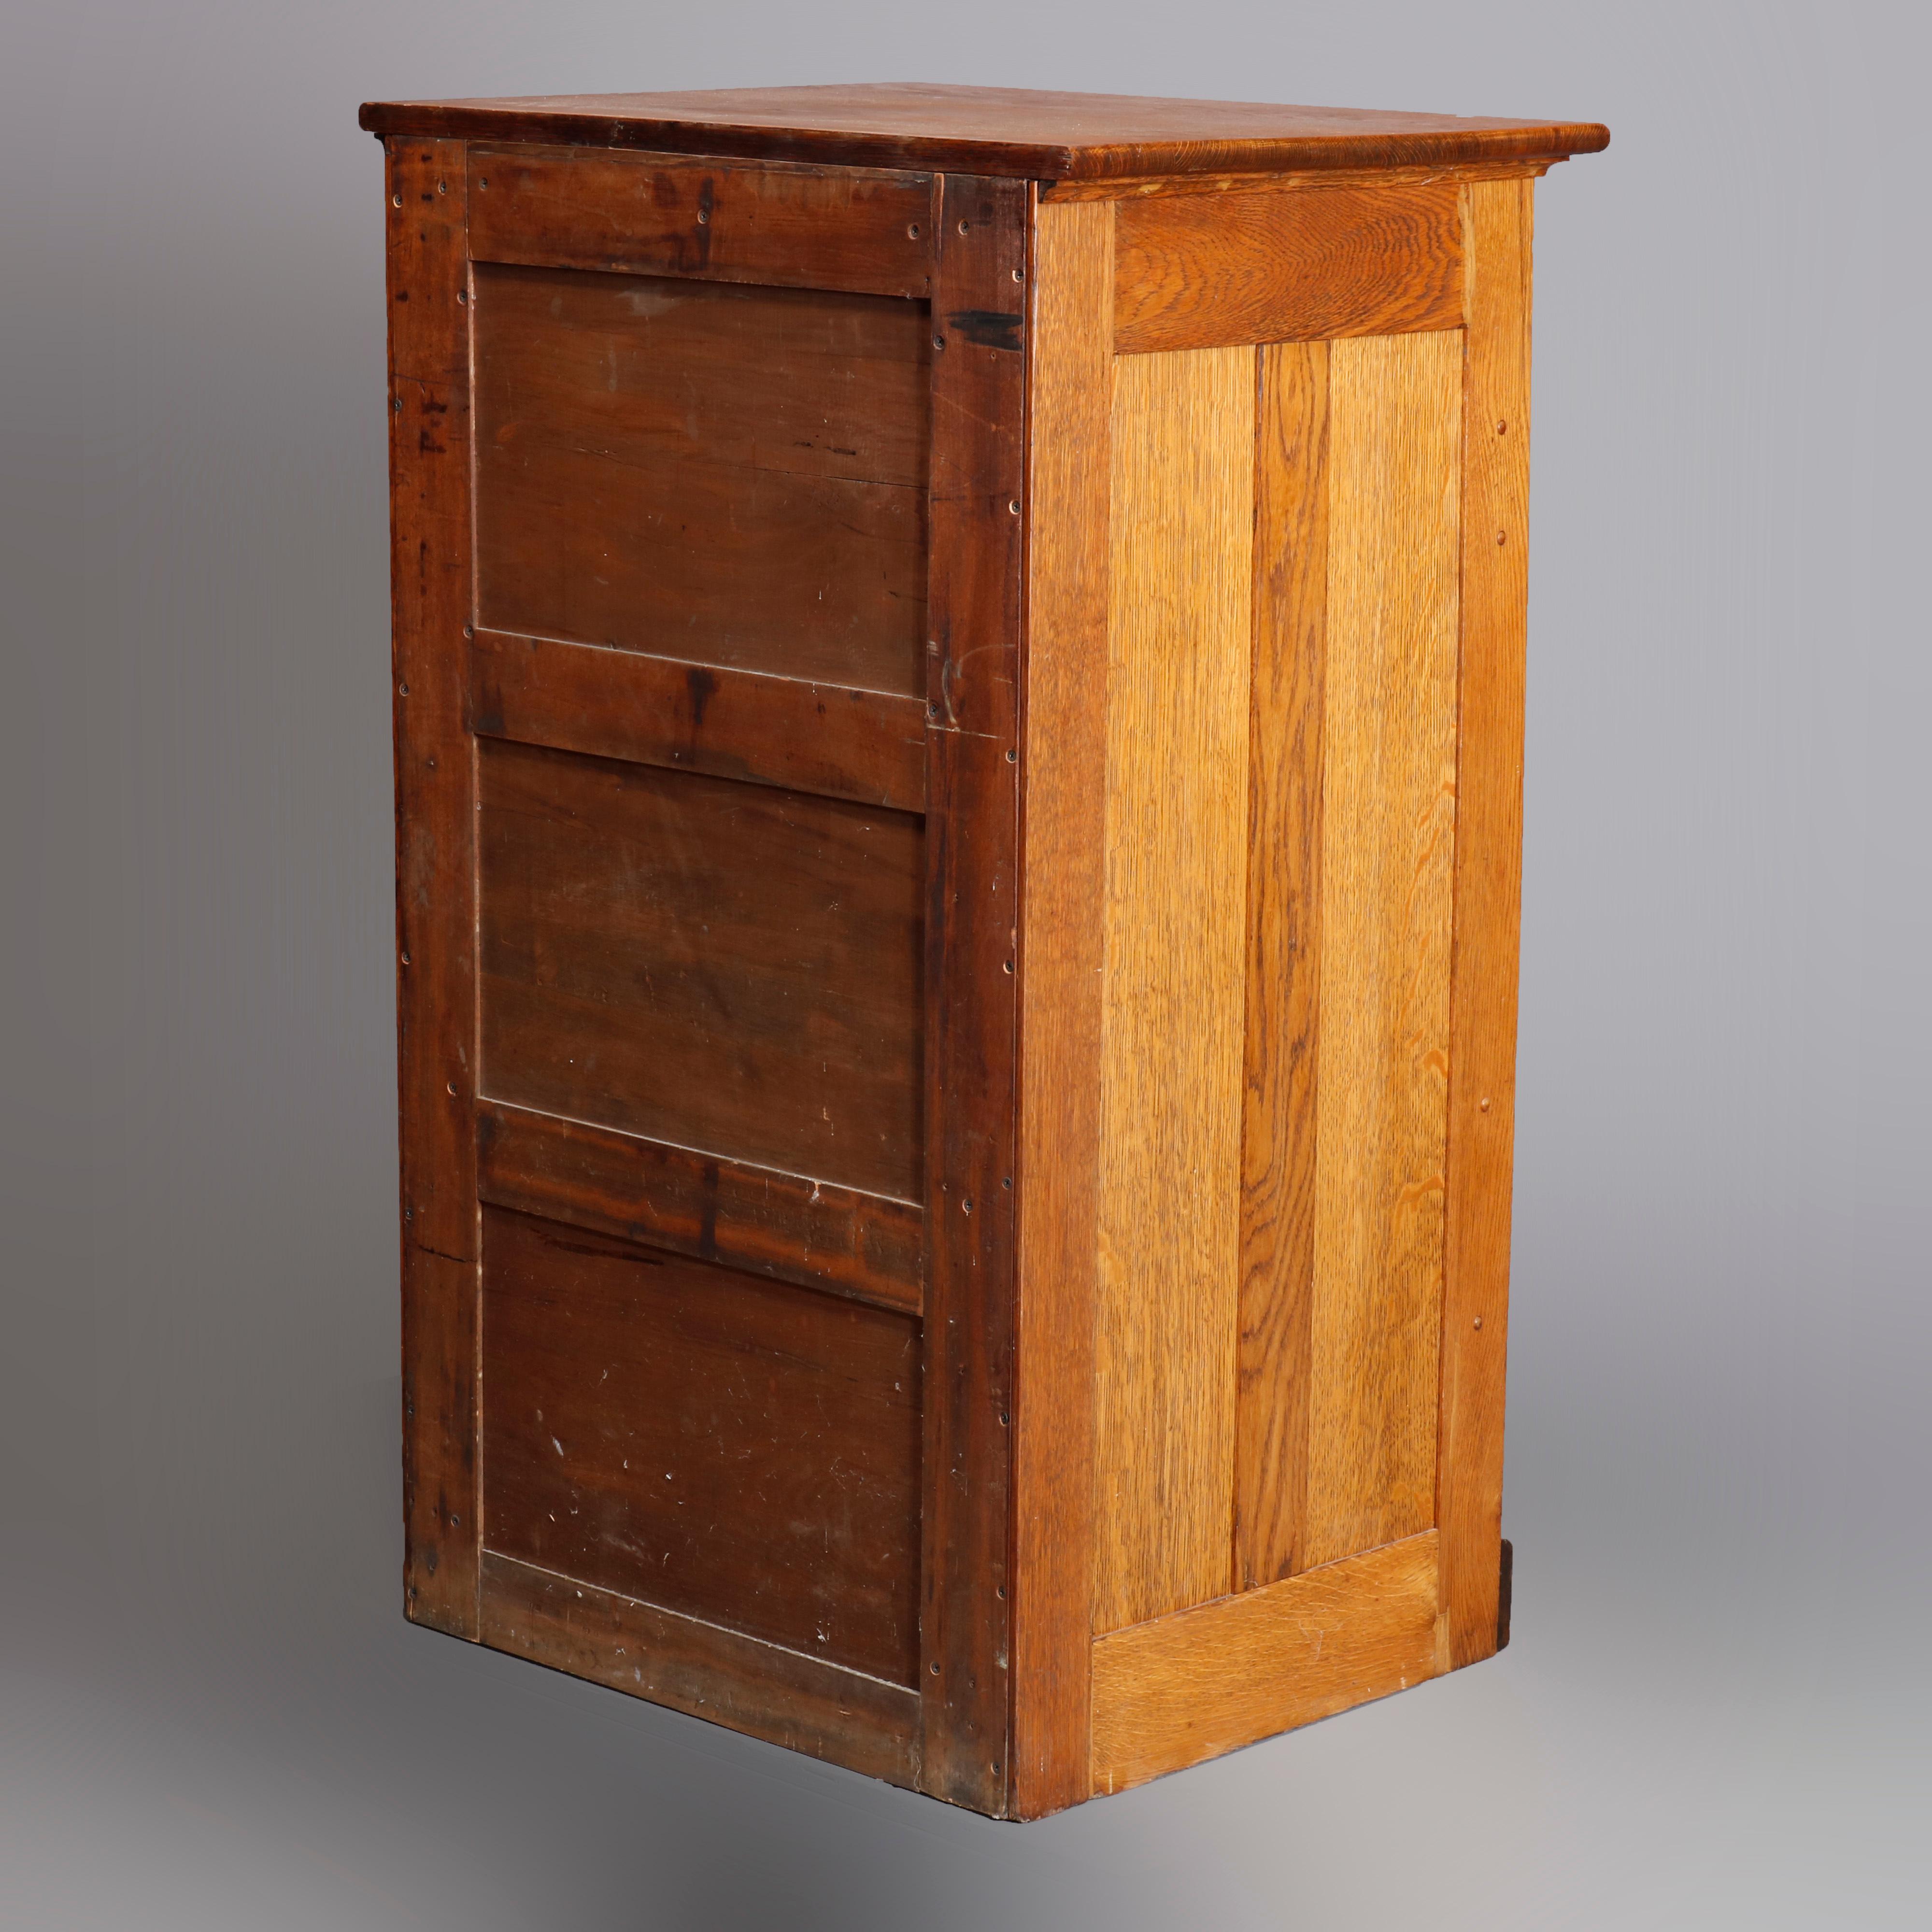 An antique map, art or print fining cabinet offers oak construction with eight drawers, brass pulls throughout, circa 1910

Measures- 45.5